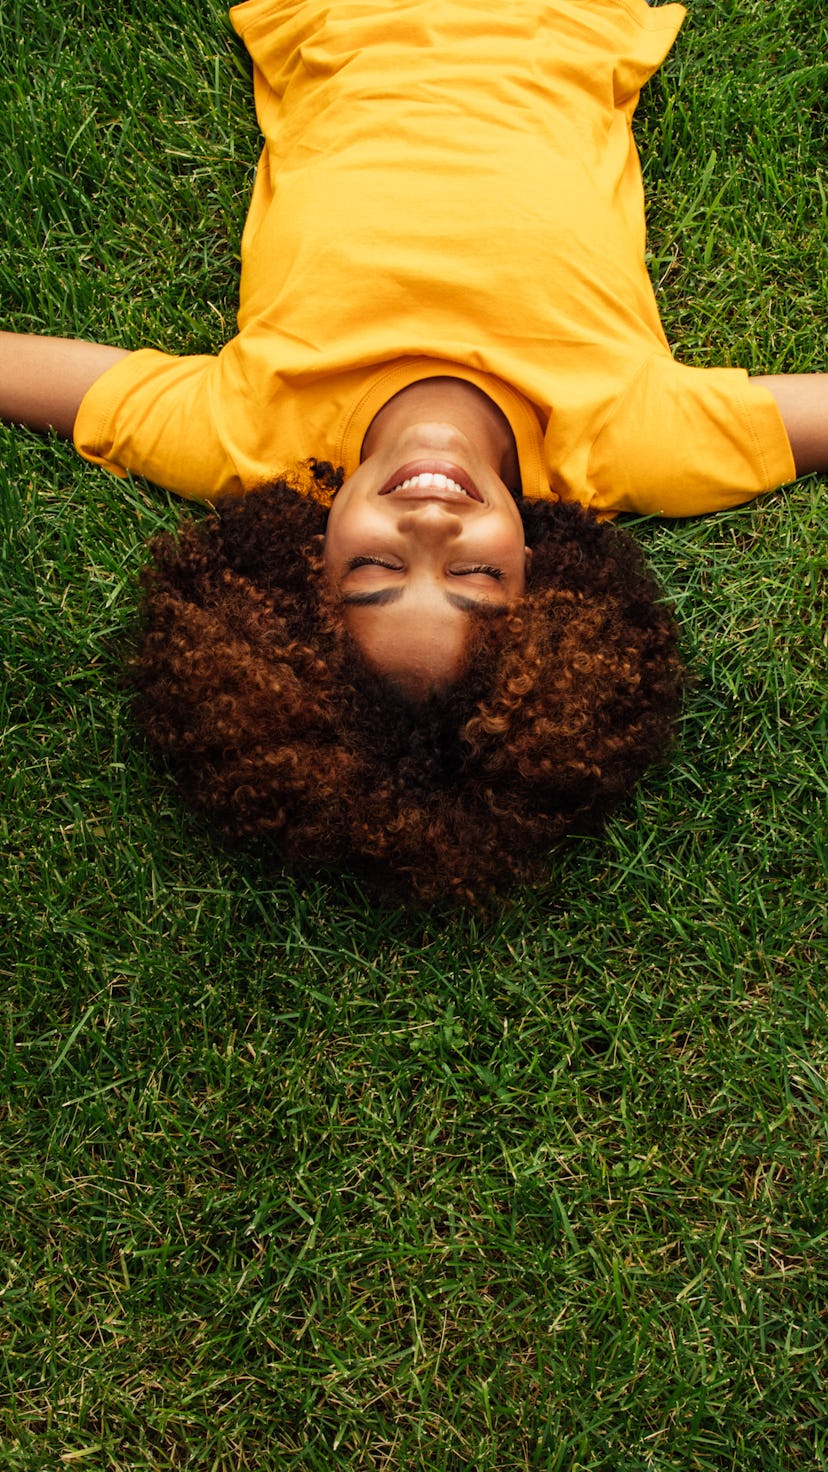 A woman lies in the grass. cancer season 2022 do's and don'ts.